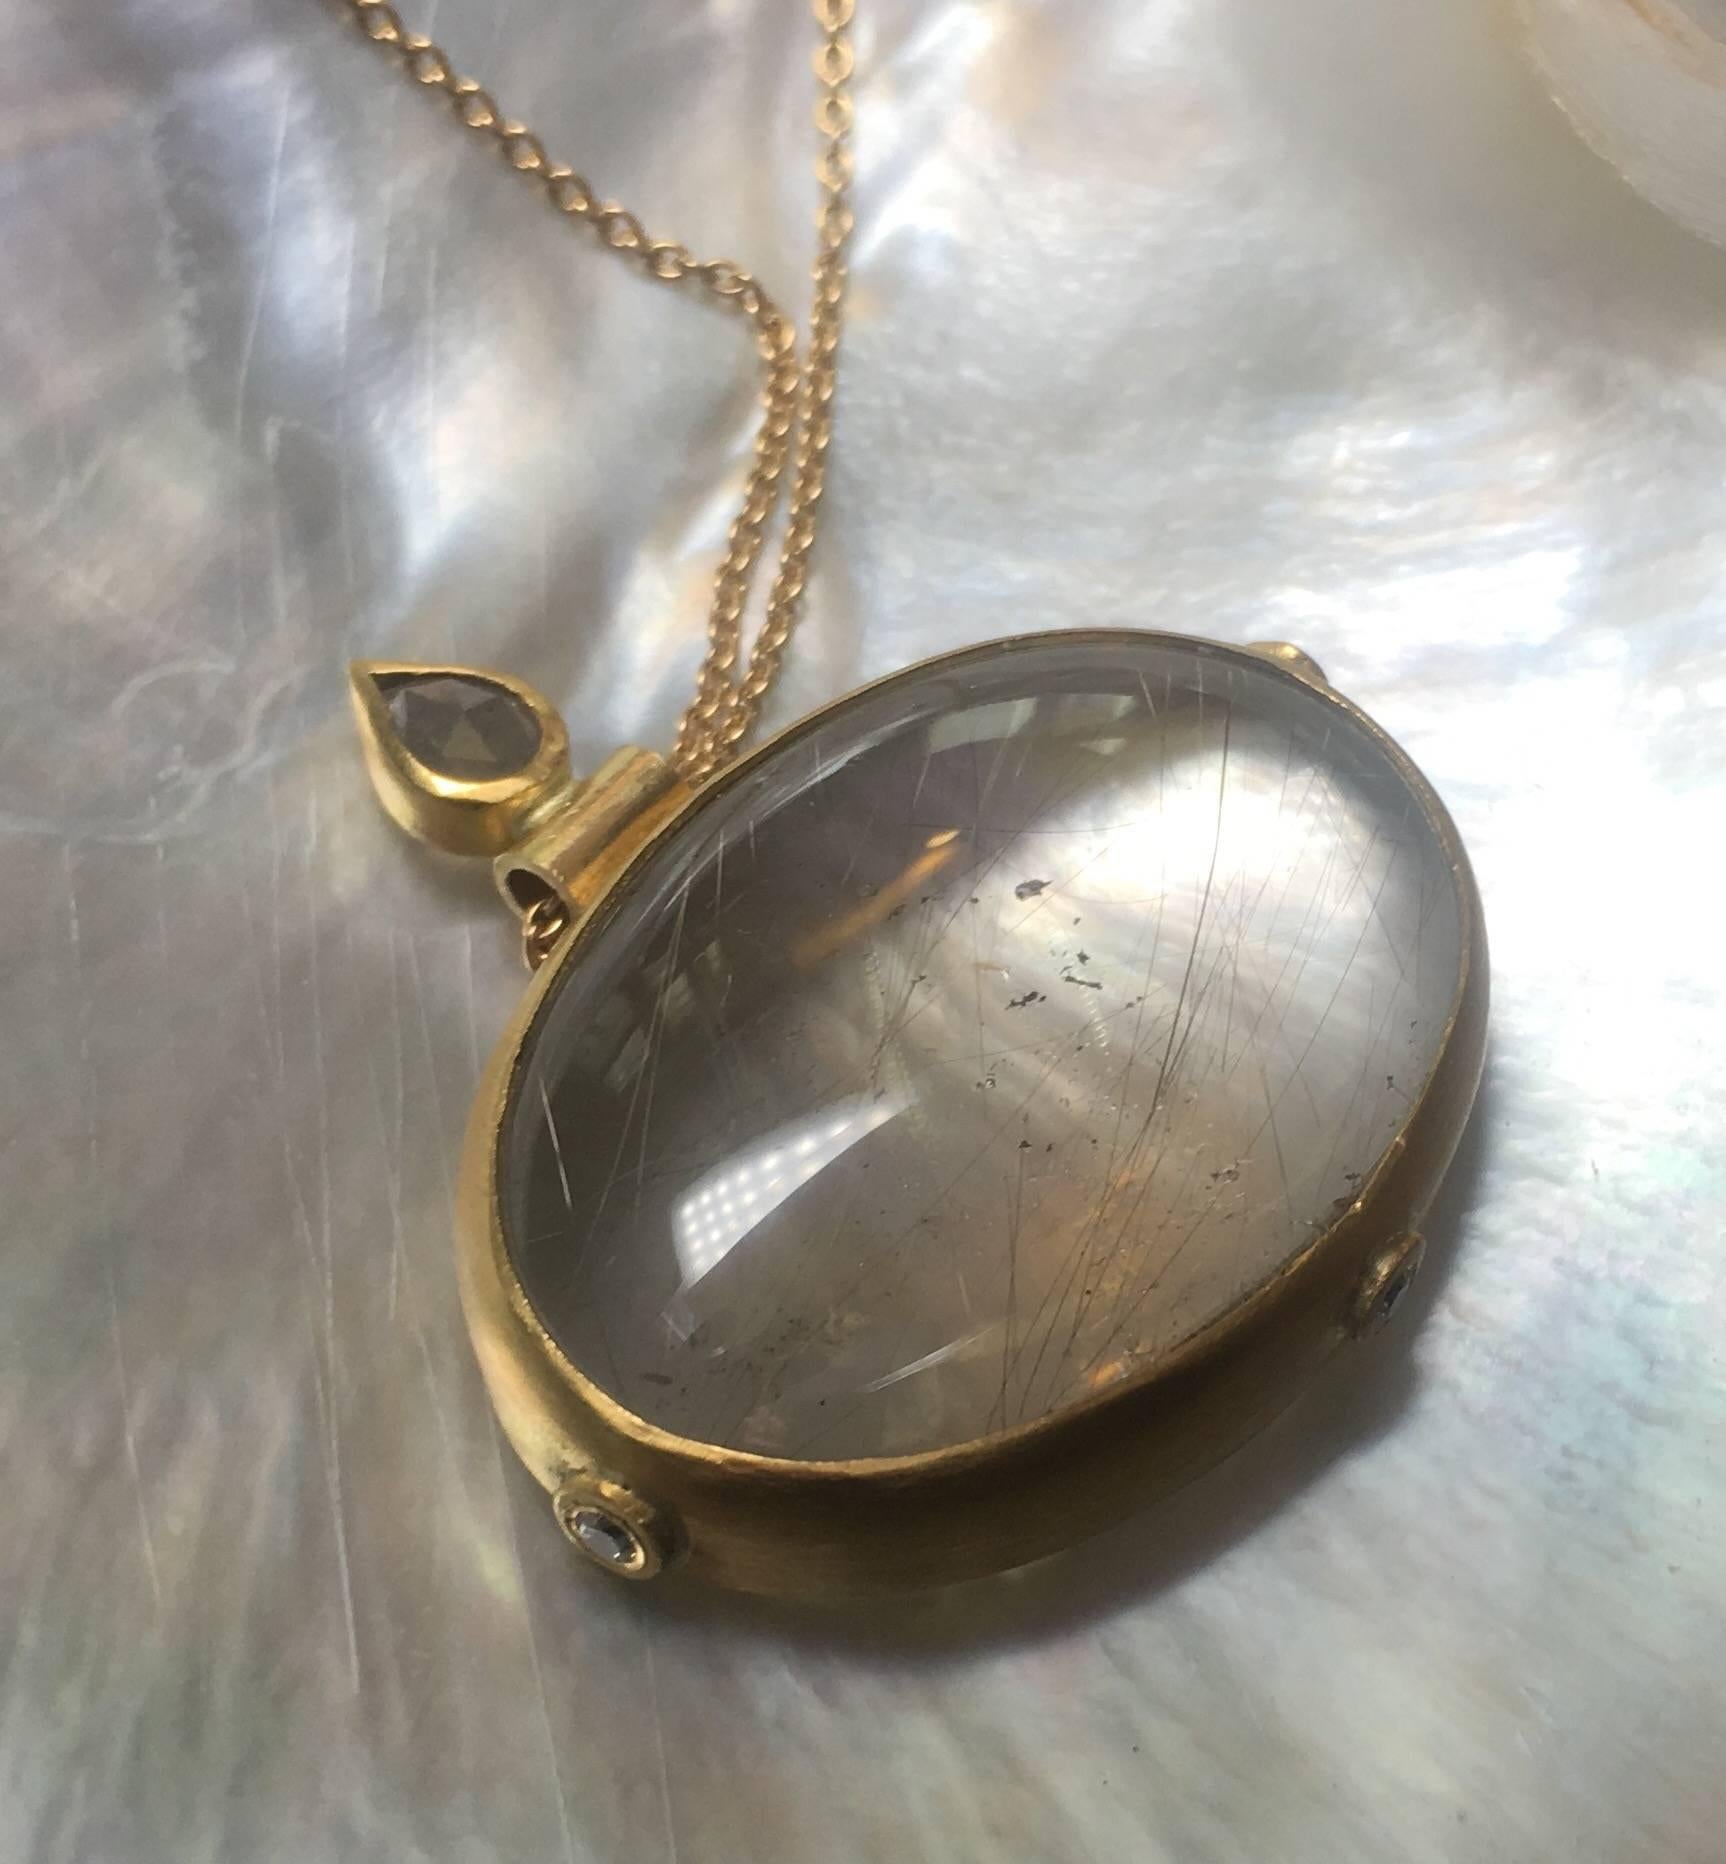 Bonoculo necklace. The loupe of jeweler Josephine Bergsoe, old-fashioned, as a gorveness would wear it, but the lens is made from a rutile quartz in a 22 karat yellow gold bezel adorned with three 0.04 ct. tw vs brilliant cut diamonds. 
On top of